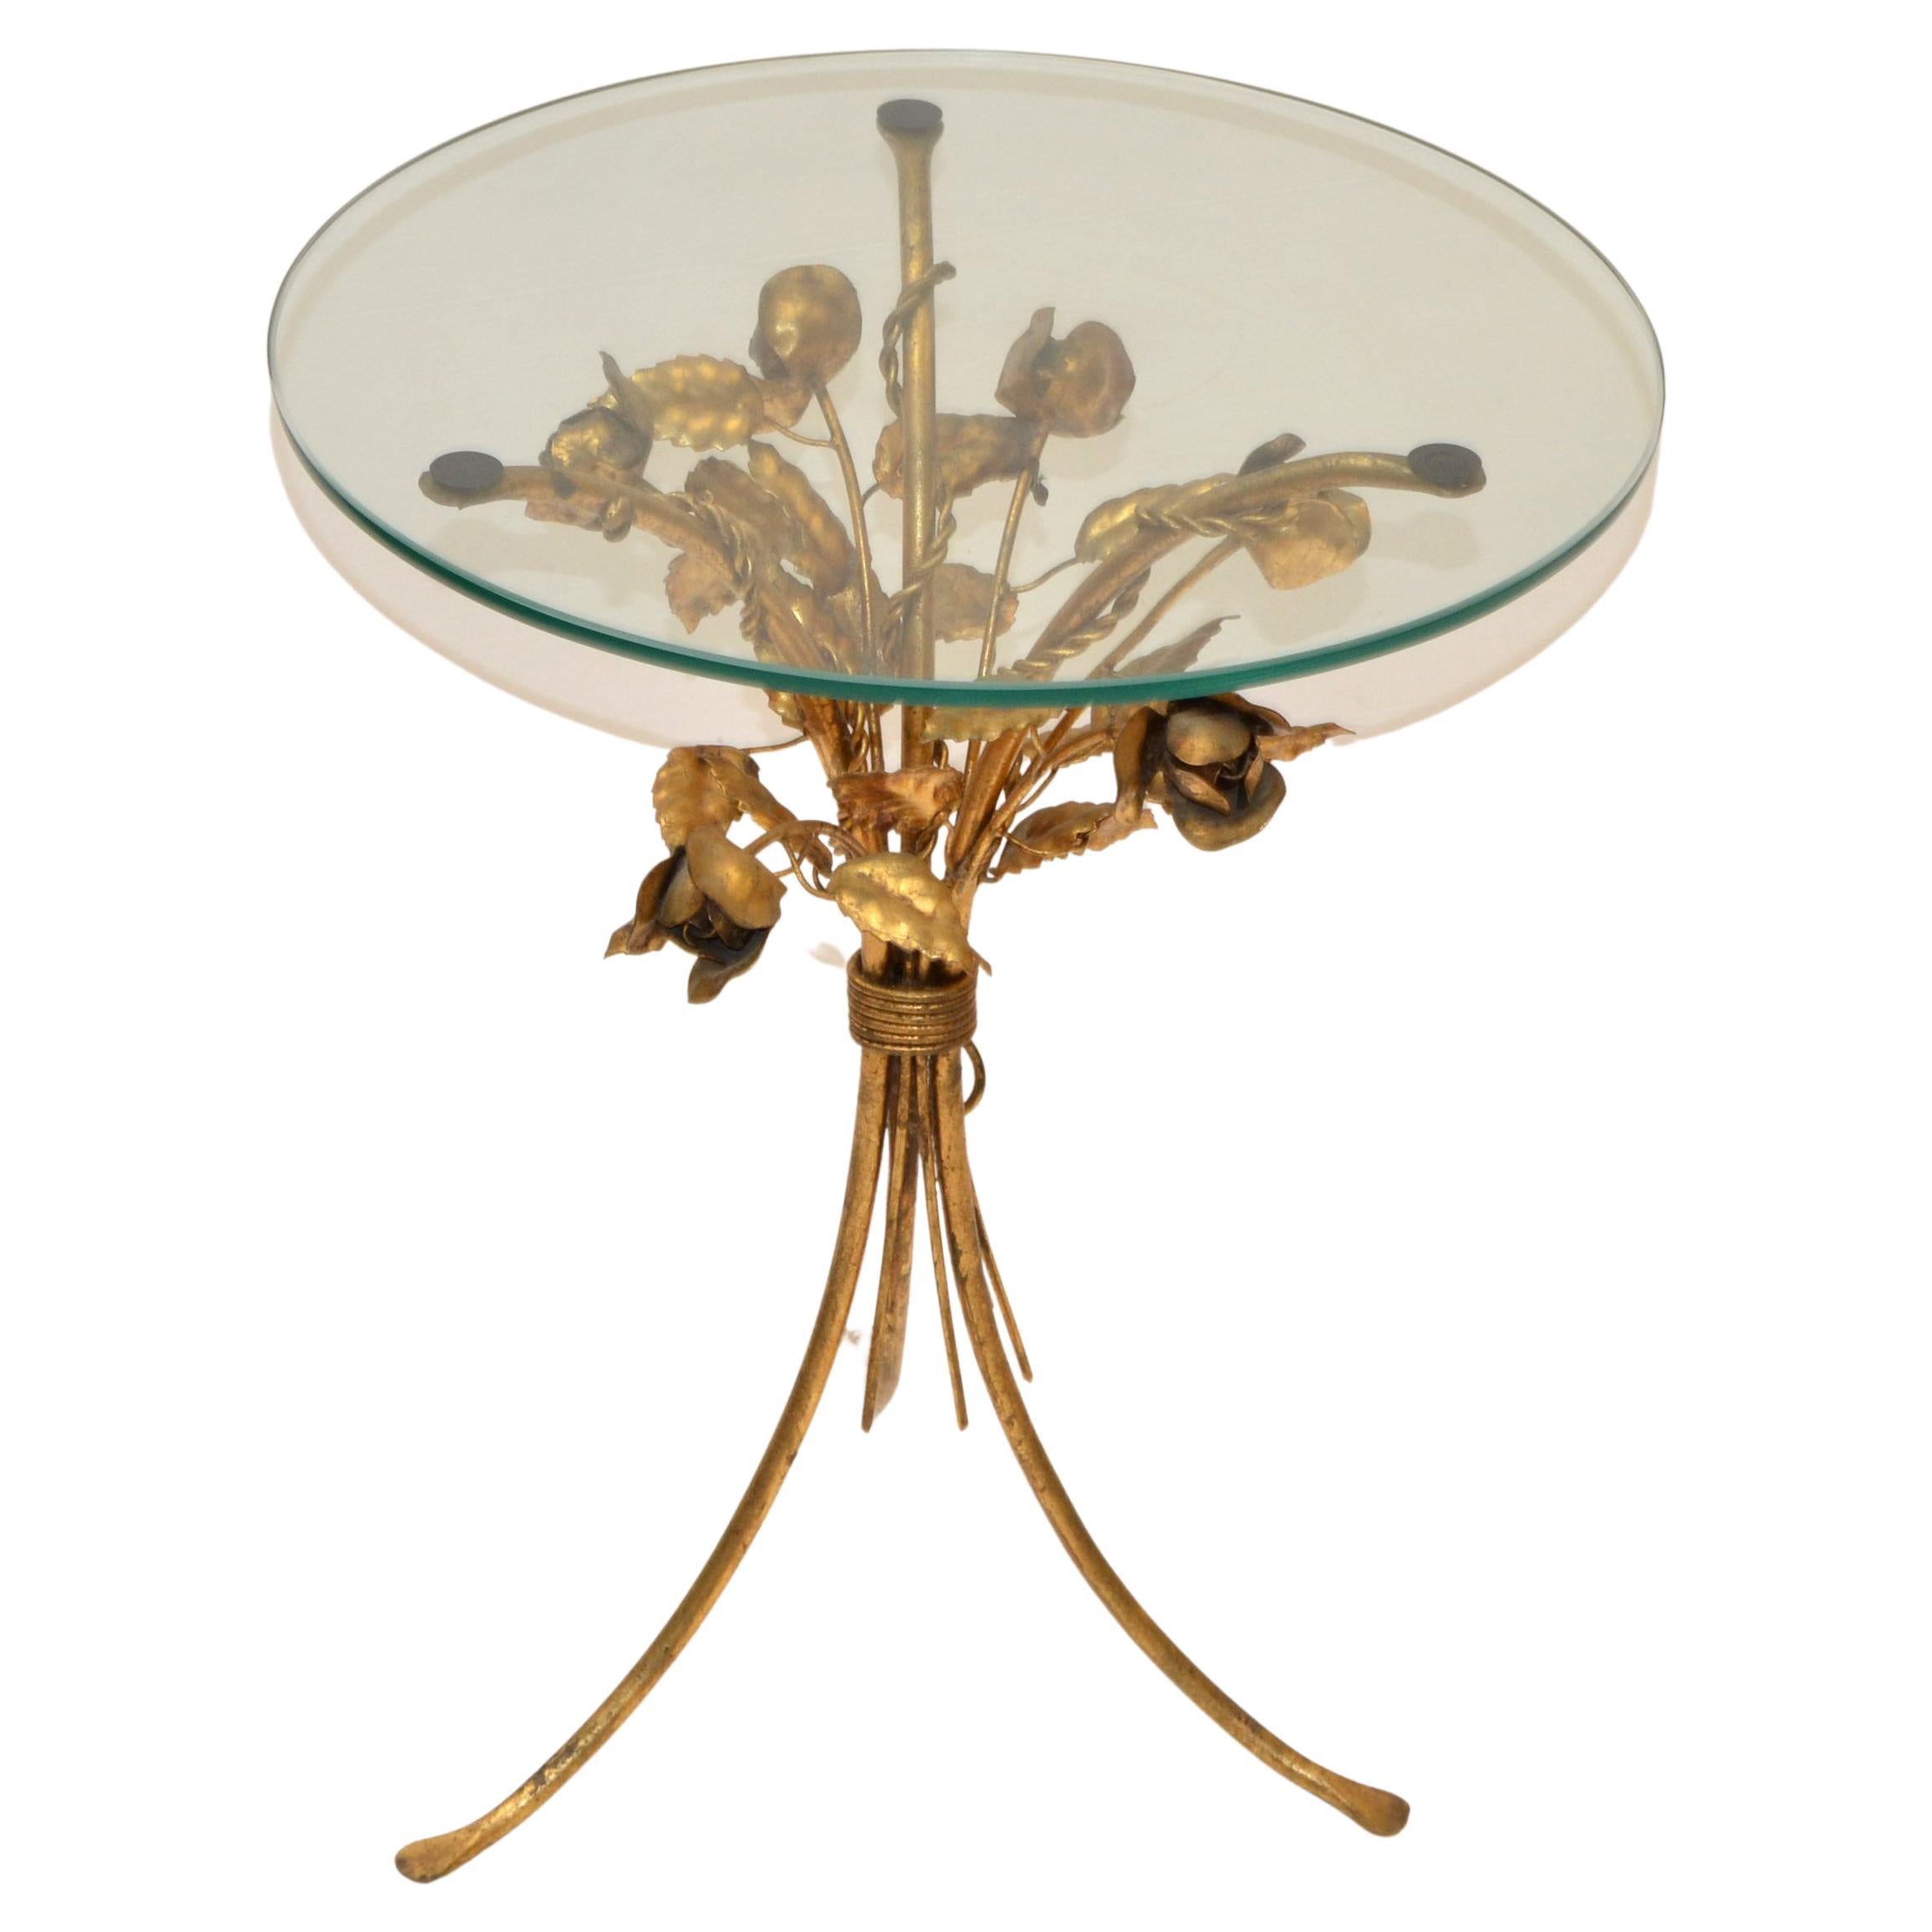 Hollywood Regency Coco Chanel style side, end or drink table in gilt iron roses on stems with glass top.
This table was made in Italy in the 1960s and shows a lot of patina.
The round glass top has some minor wear such as scratches due to